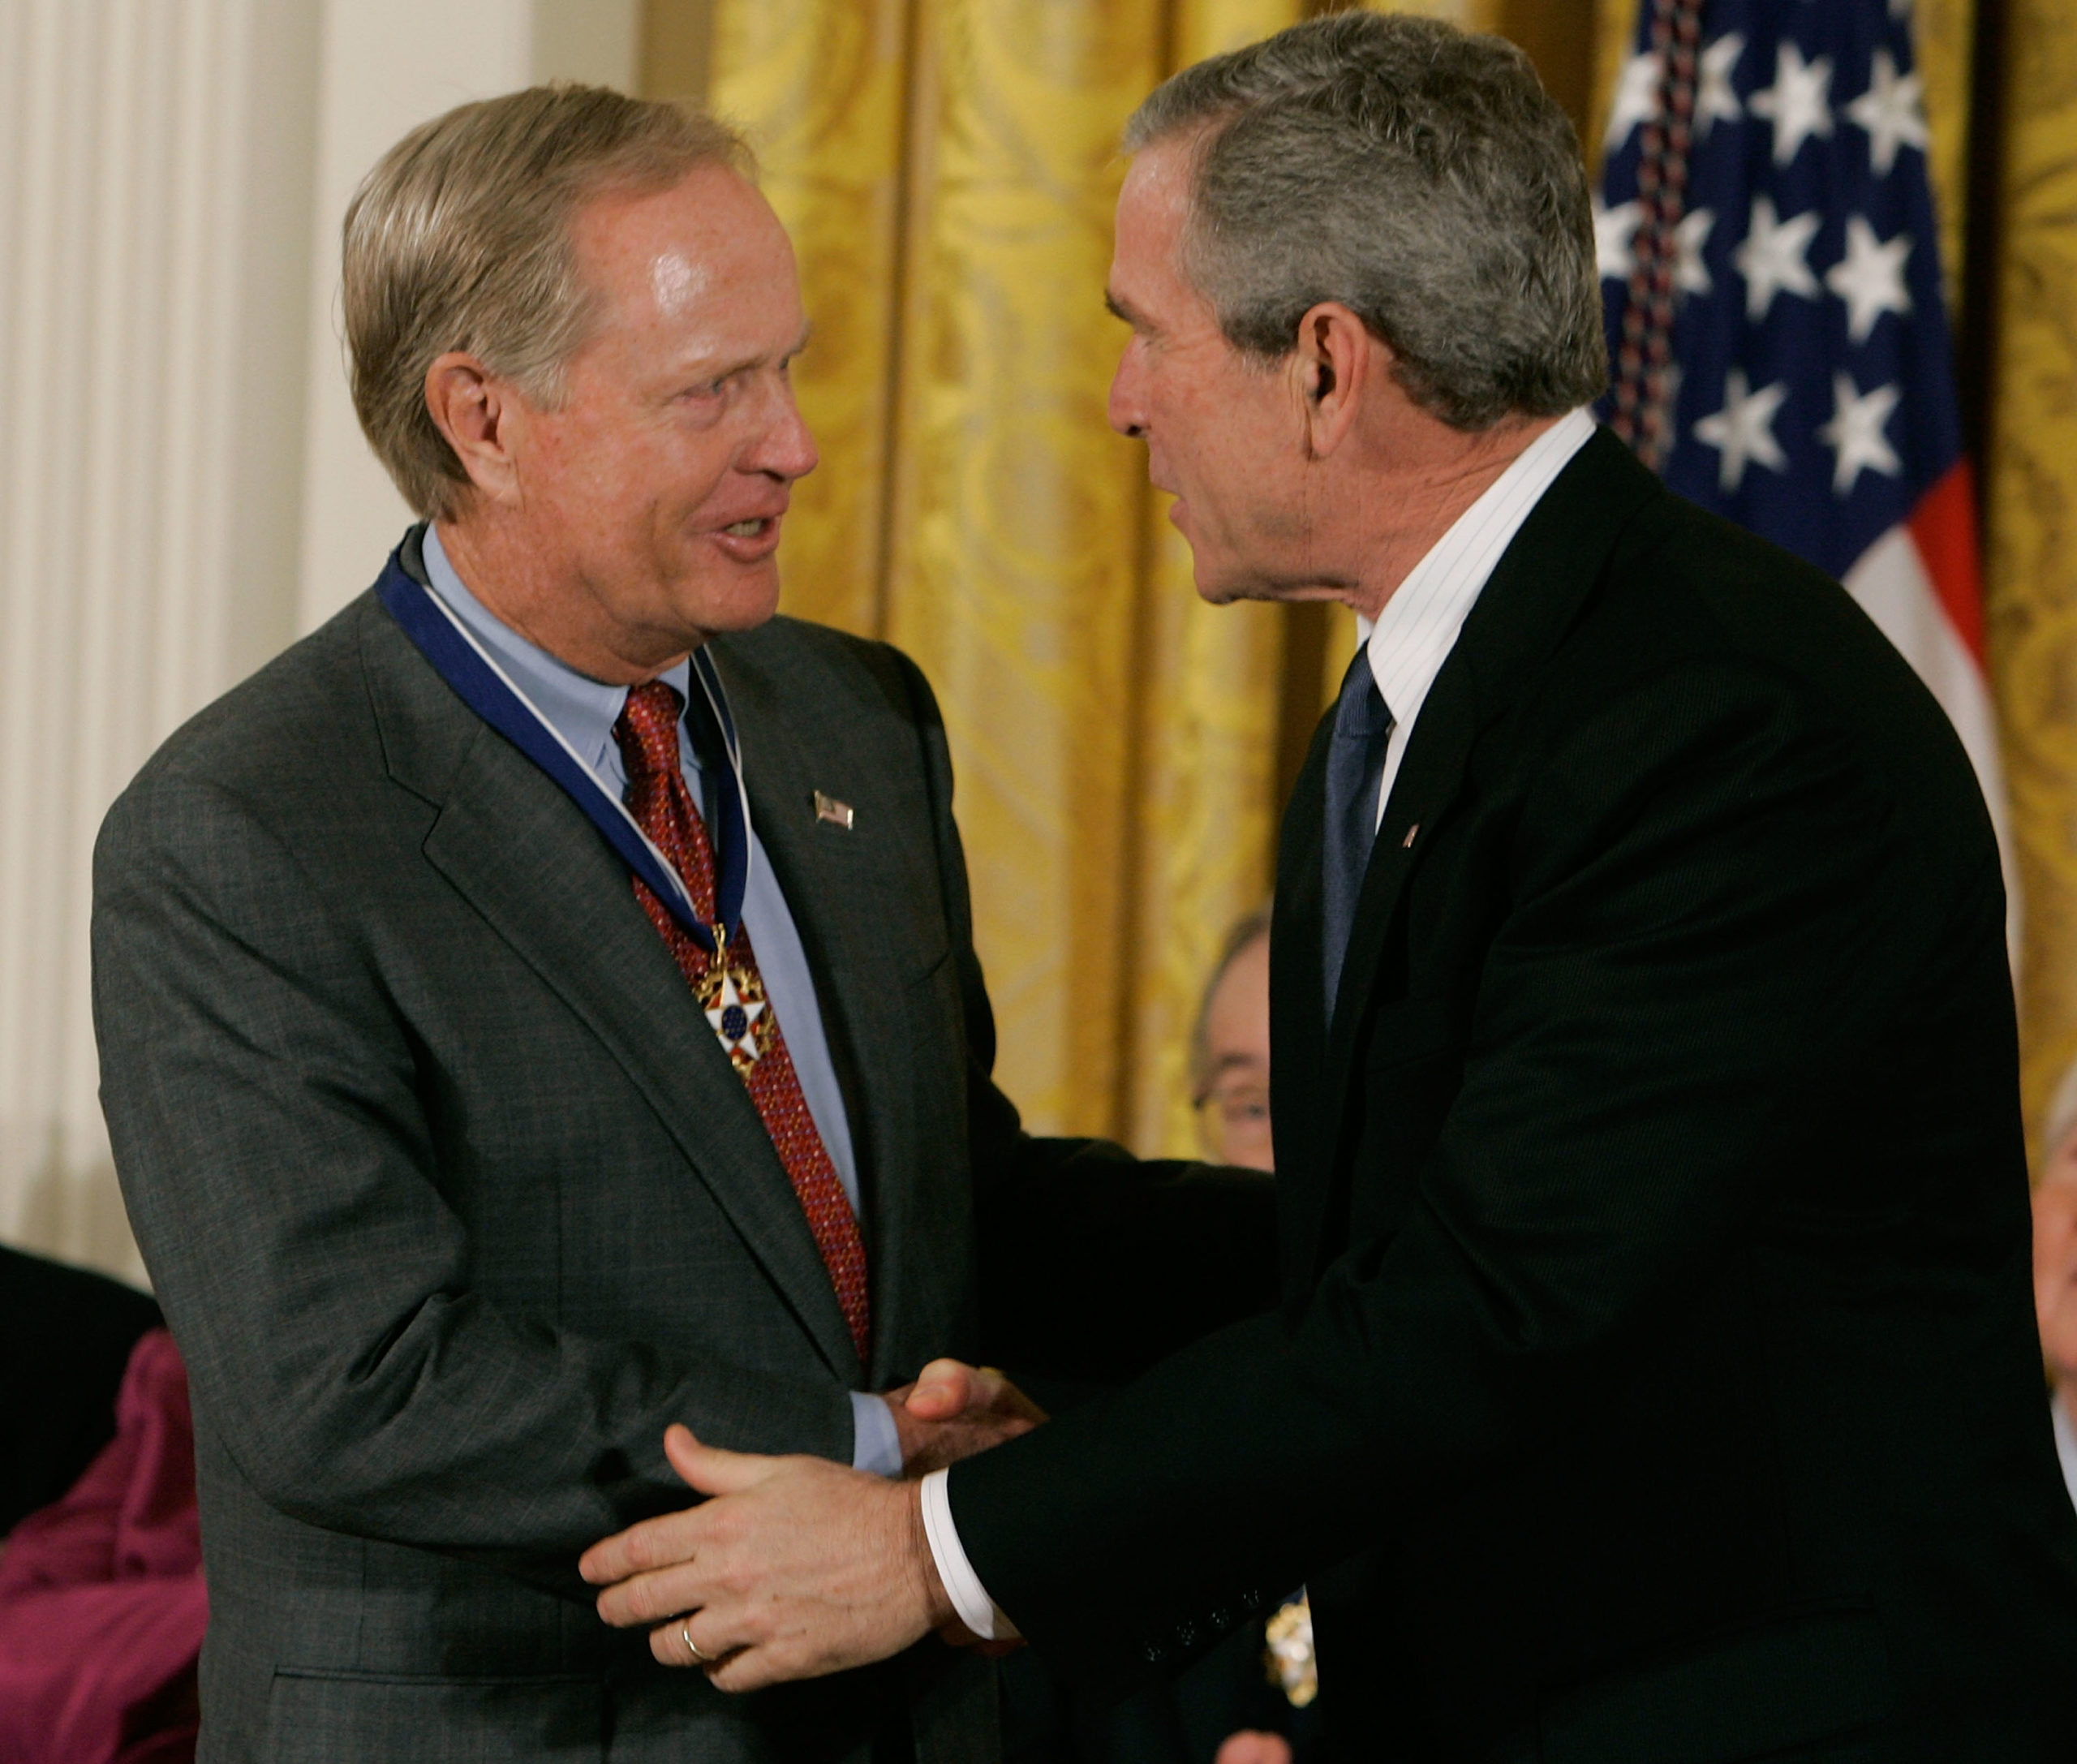 WASHINGTON - NOVEMBER 09: U.S. President George W. Bush (R) congratulates golfing great Jack Nicklaus after presenting him with the Medal of Freedom during a ceremony at the White House November 9, 2005 in Washington DC. President Bush presented medals to the 2005 Medal of Freedom recipients during a ceremony in the East Room. Mark Wilson/Getty Images